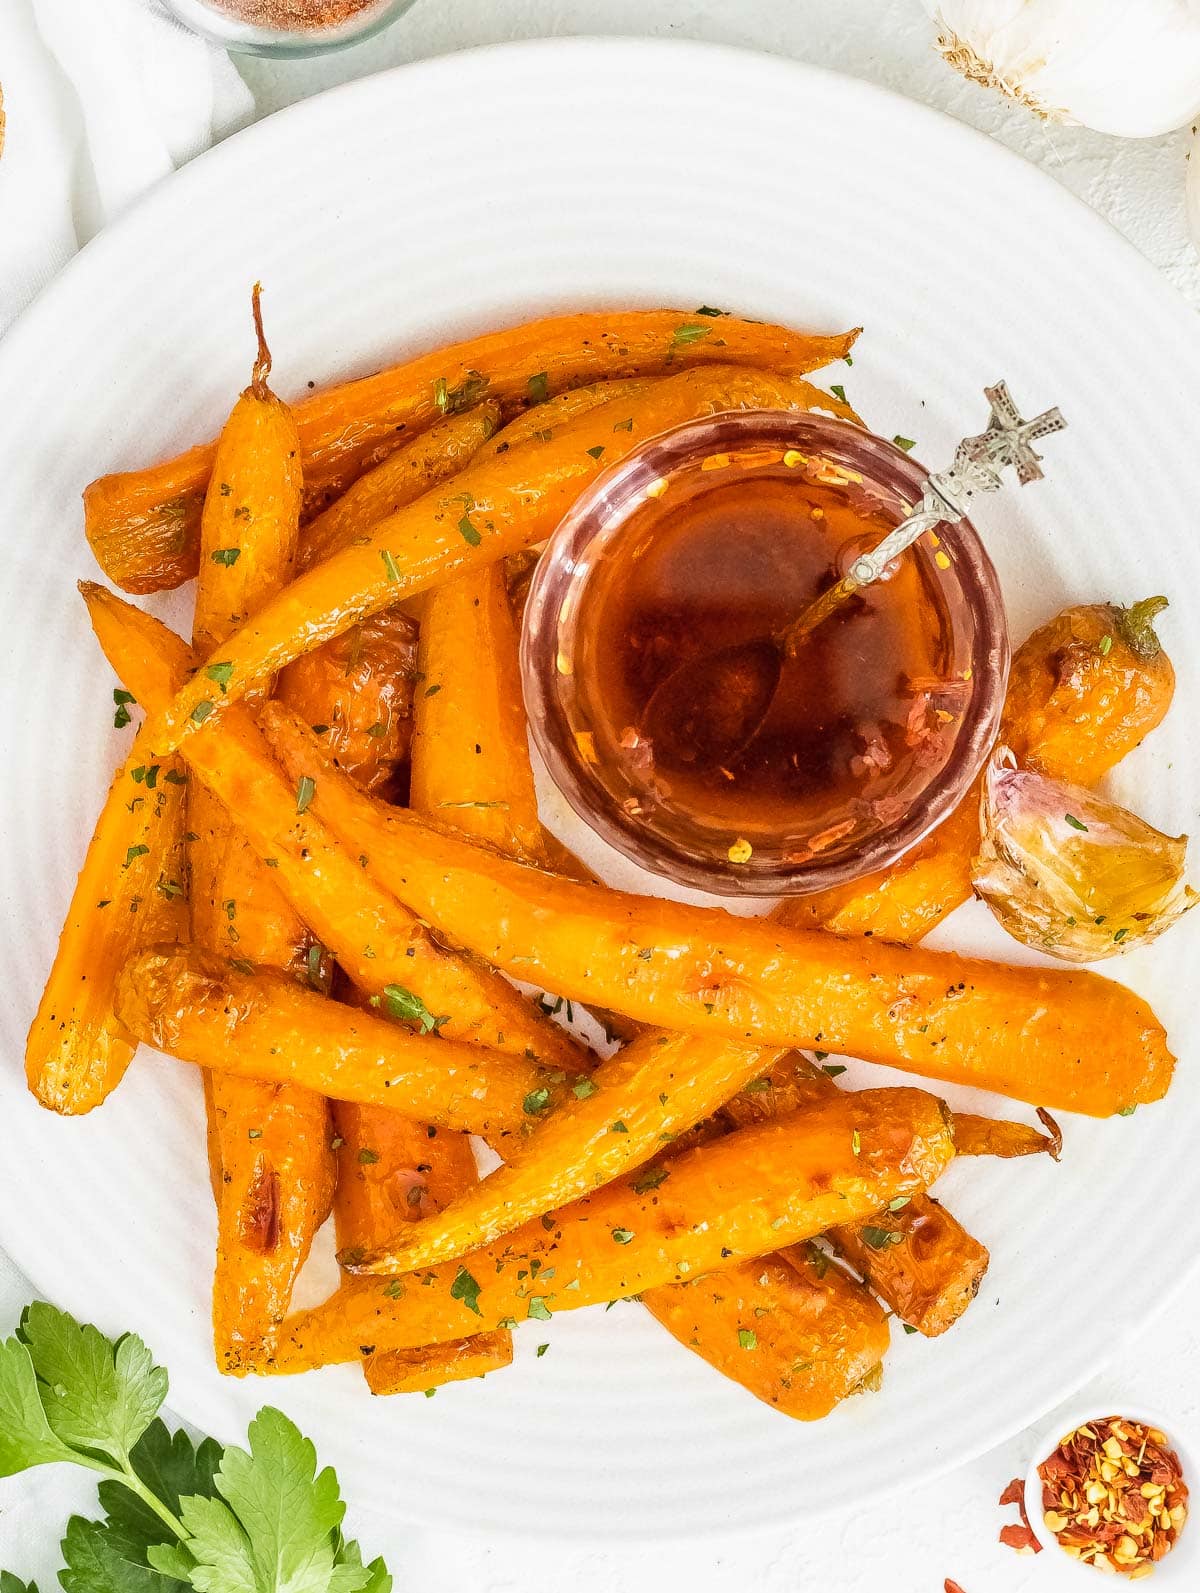 chili oil on oven-roasted carrots